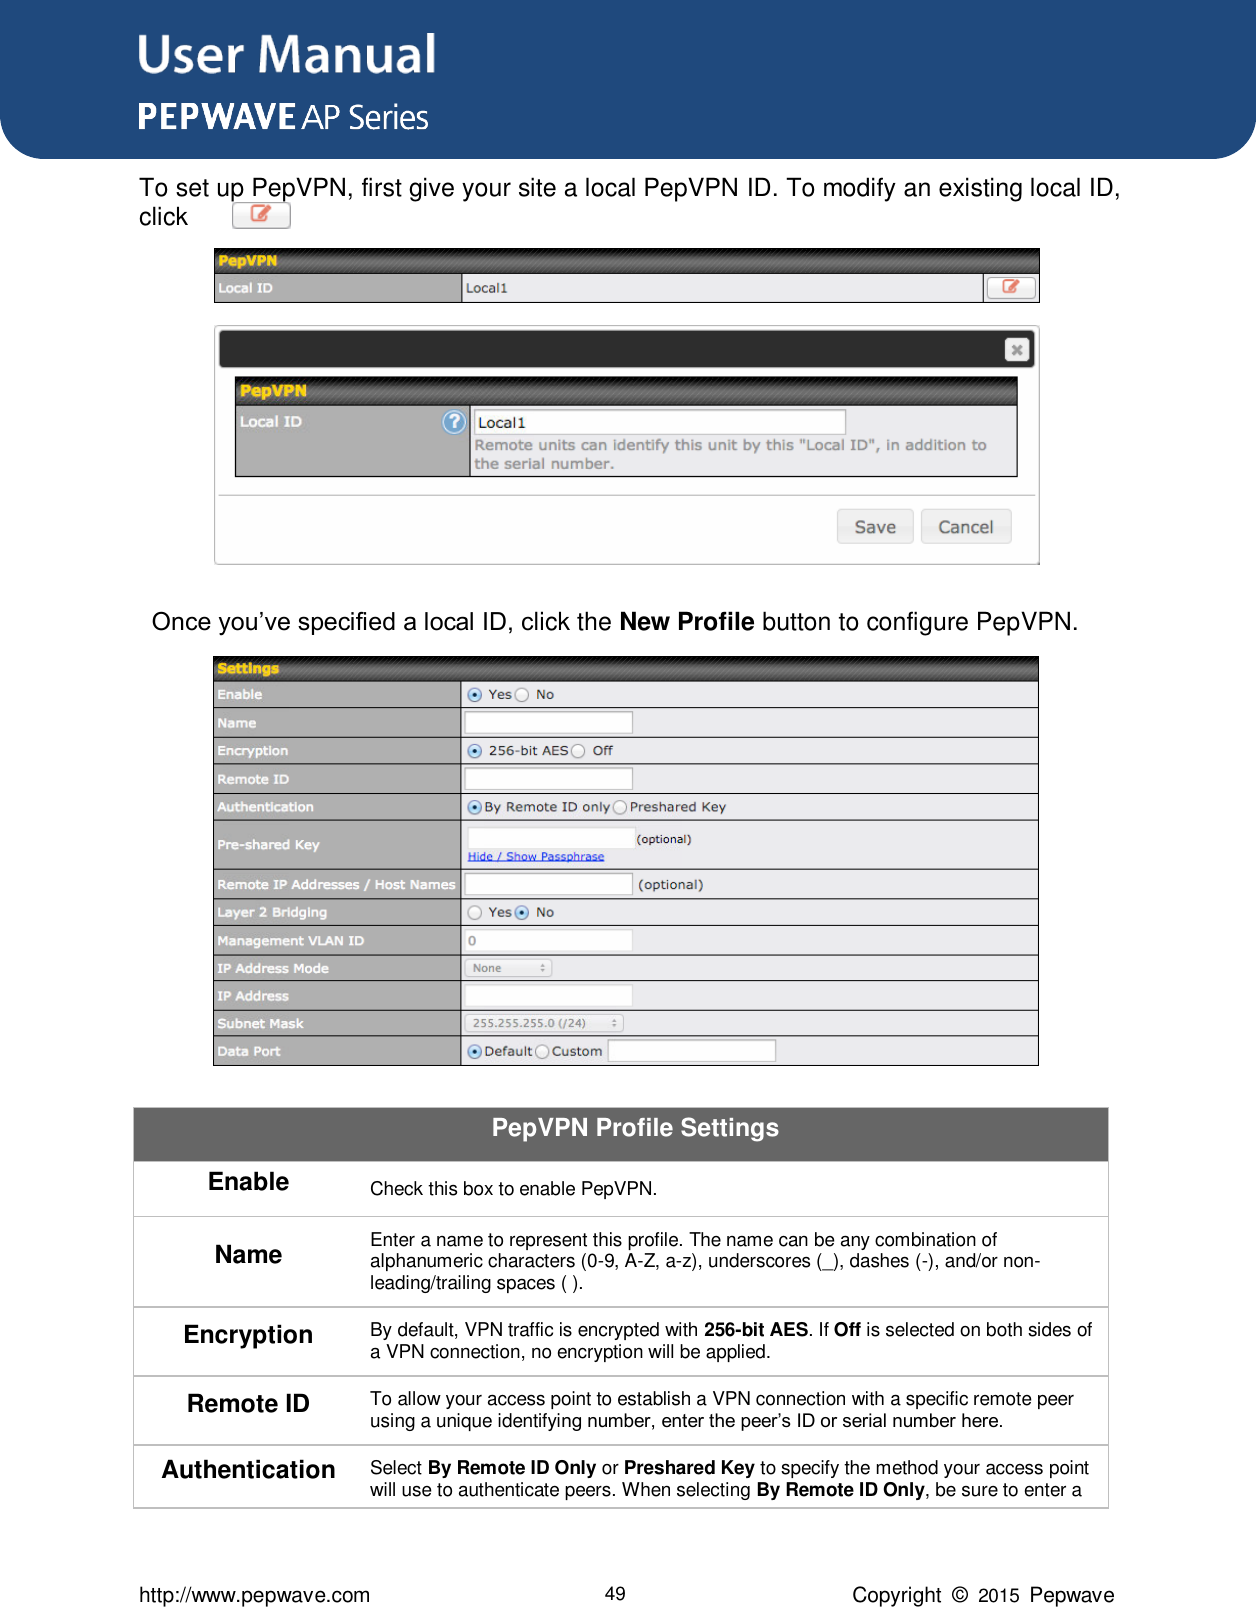 User Manual      http://www.pepwave.com 49 Copyright  ©  2015  Pepwave To set up PepVPN, first give your site a local PepVPN ID. To modify an existing local ID, click          .   Once you’ve specified a local ID, click the New Profile button to configure PepVPN.  PepVPN Profile Settings Enable Check this box to enable PepVPN. Name Enter a name to represent this profile. The name can be any combination of alphanumeric characters (0-9, A-Z, a-z), underscores (_), dashes (-), and/or non-leading/trailing spaces ( ). Encryption By default, VPN traffic is encrypted with 256-bit AES. If Off is selected on both sides of a VPN connection, no encryption will be applied. Remote ID To allow your access point to establish a VPN connection with a specific remote peer using a unique identifying number, enter the peer’s ID or serial number here. Authentication Select By Remote ID Only or Preshared Key to specify the method your access point will use to authenticate peers. When selecting By Remote ID Only, be sure to enter a 